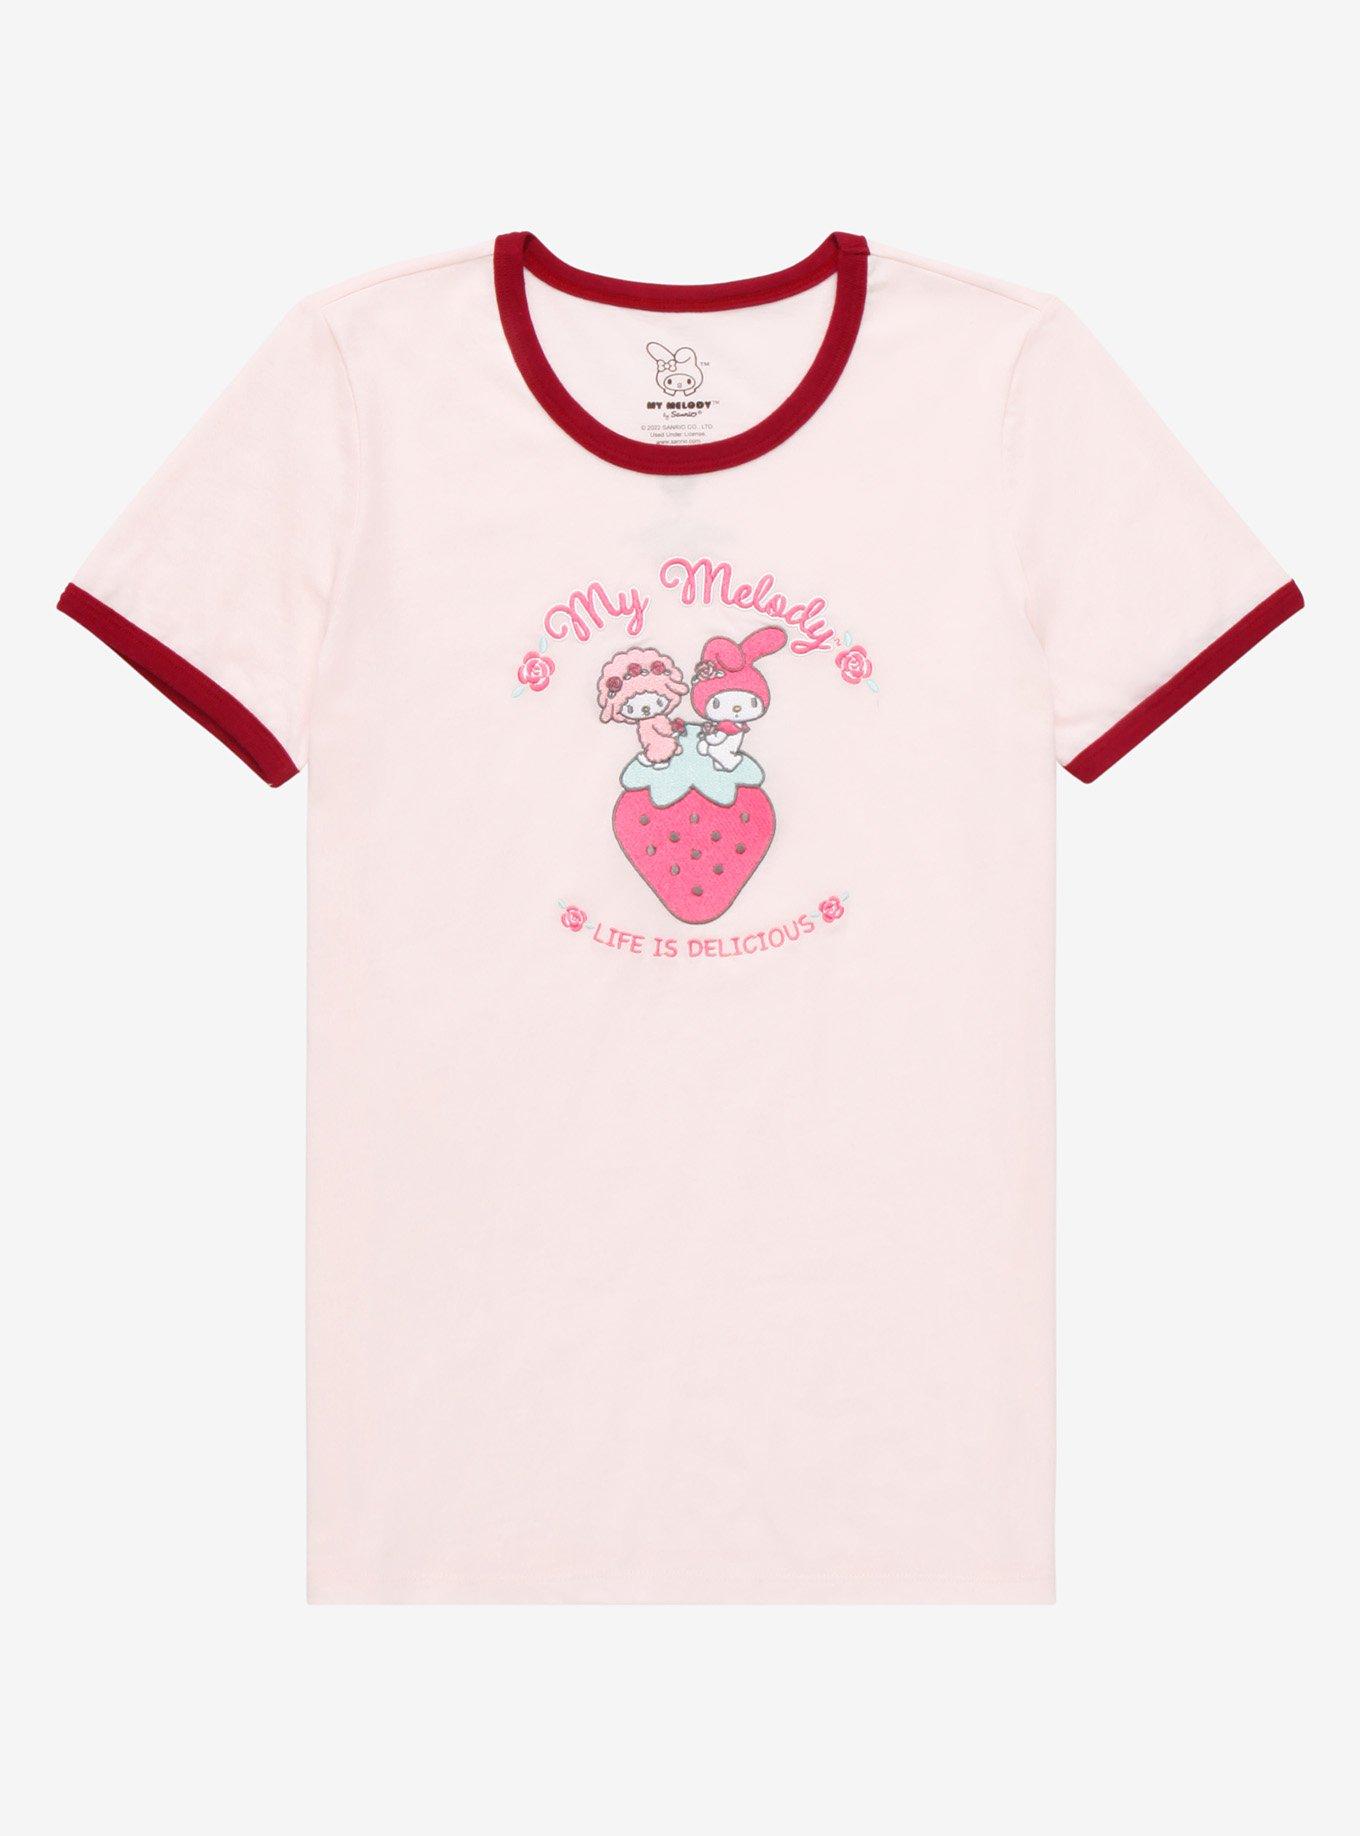 Sanrio My Melody & My Sweet Piano Life is Delicious Women's Ringer T-Shirt - BoxLunch Exclusive, LIGHT PINK, hi-res